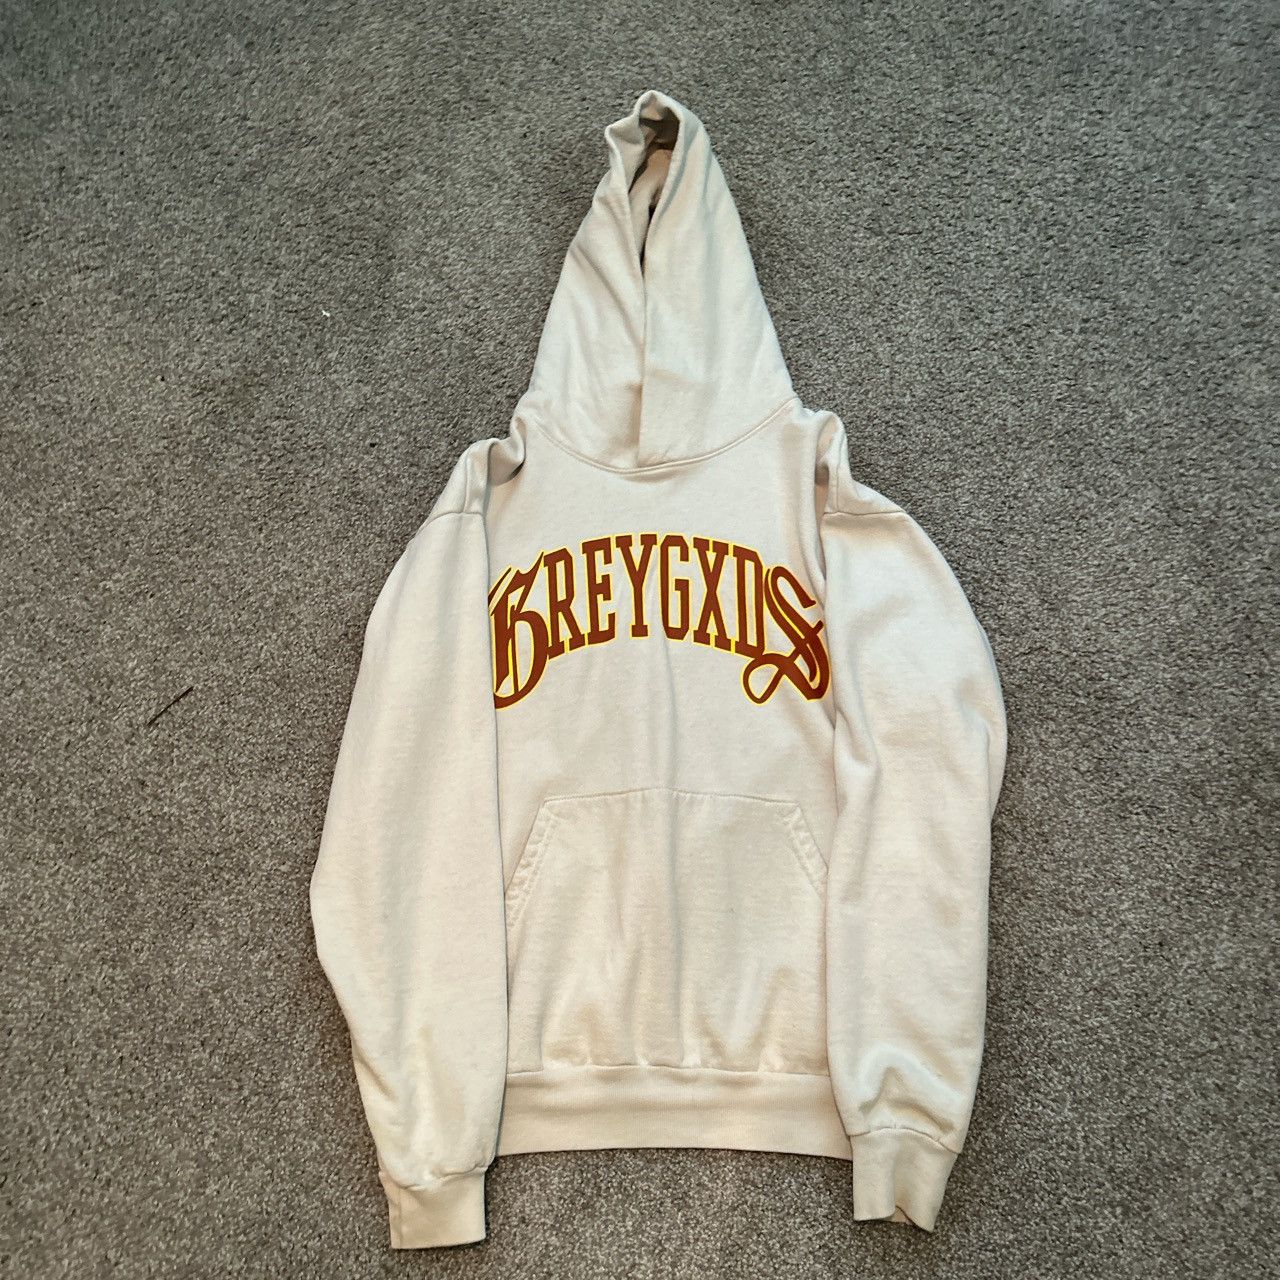 G59 Records Greygxds rare hoodie | Grailed